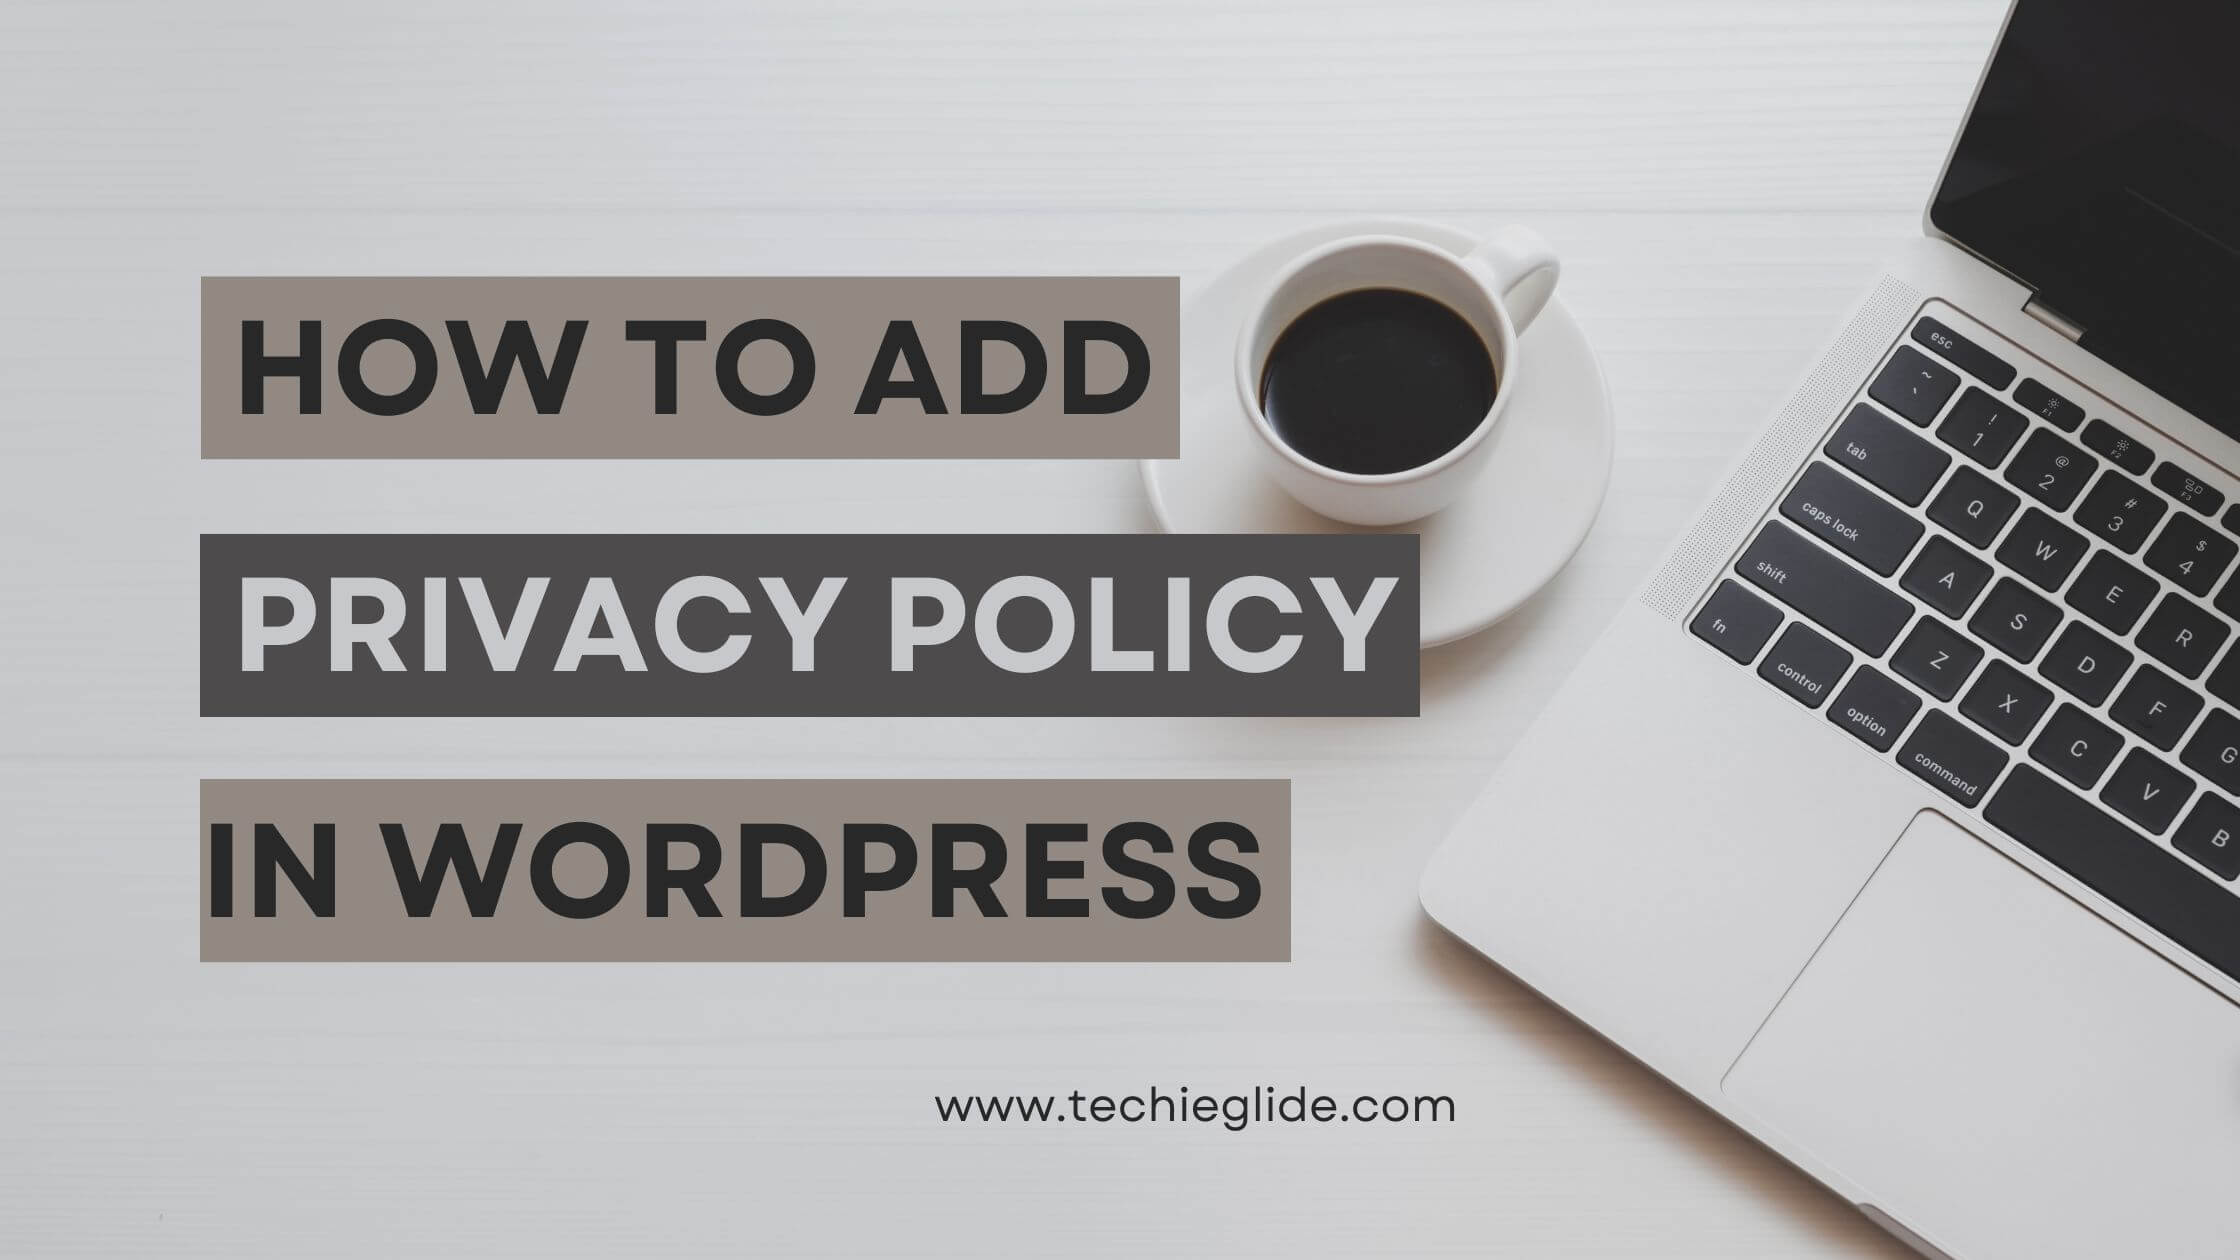 How to add privacy policy in wordpress